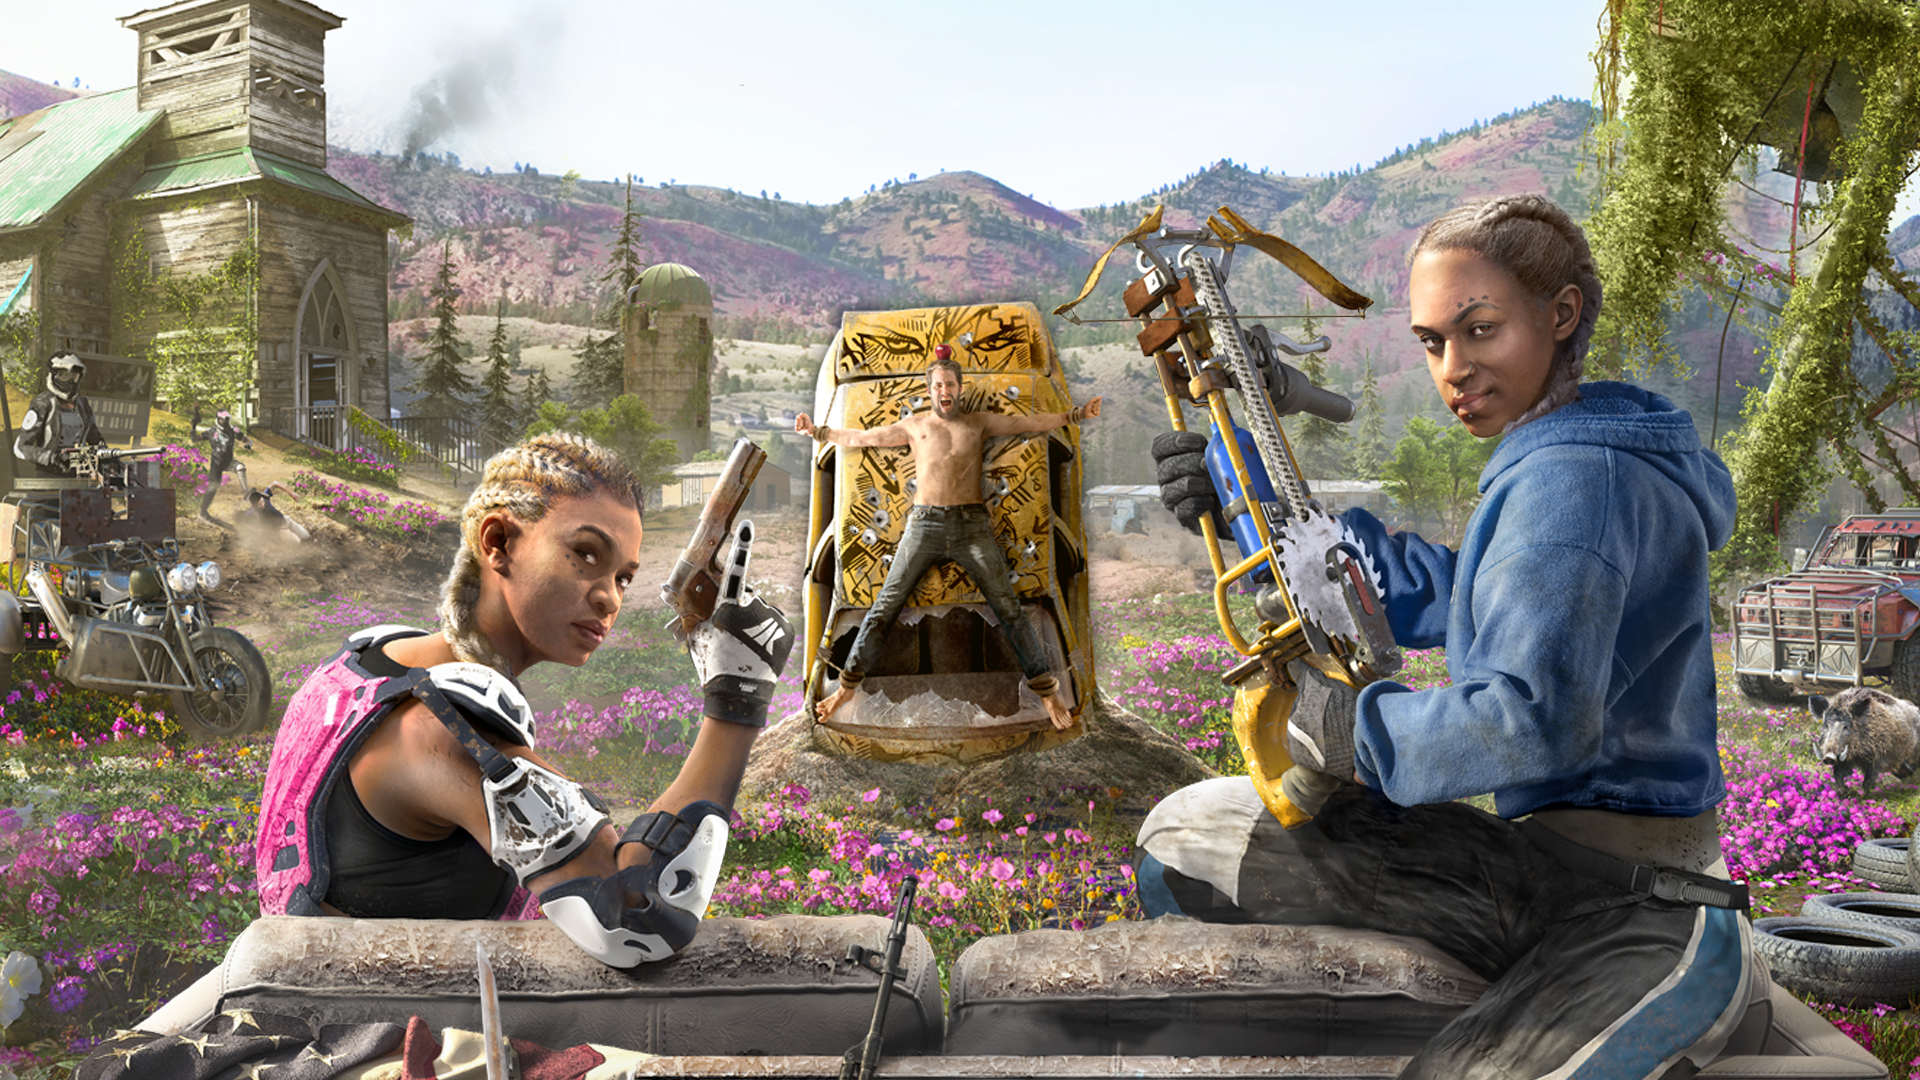 far cry new dawn gamepass download free